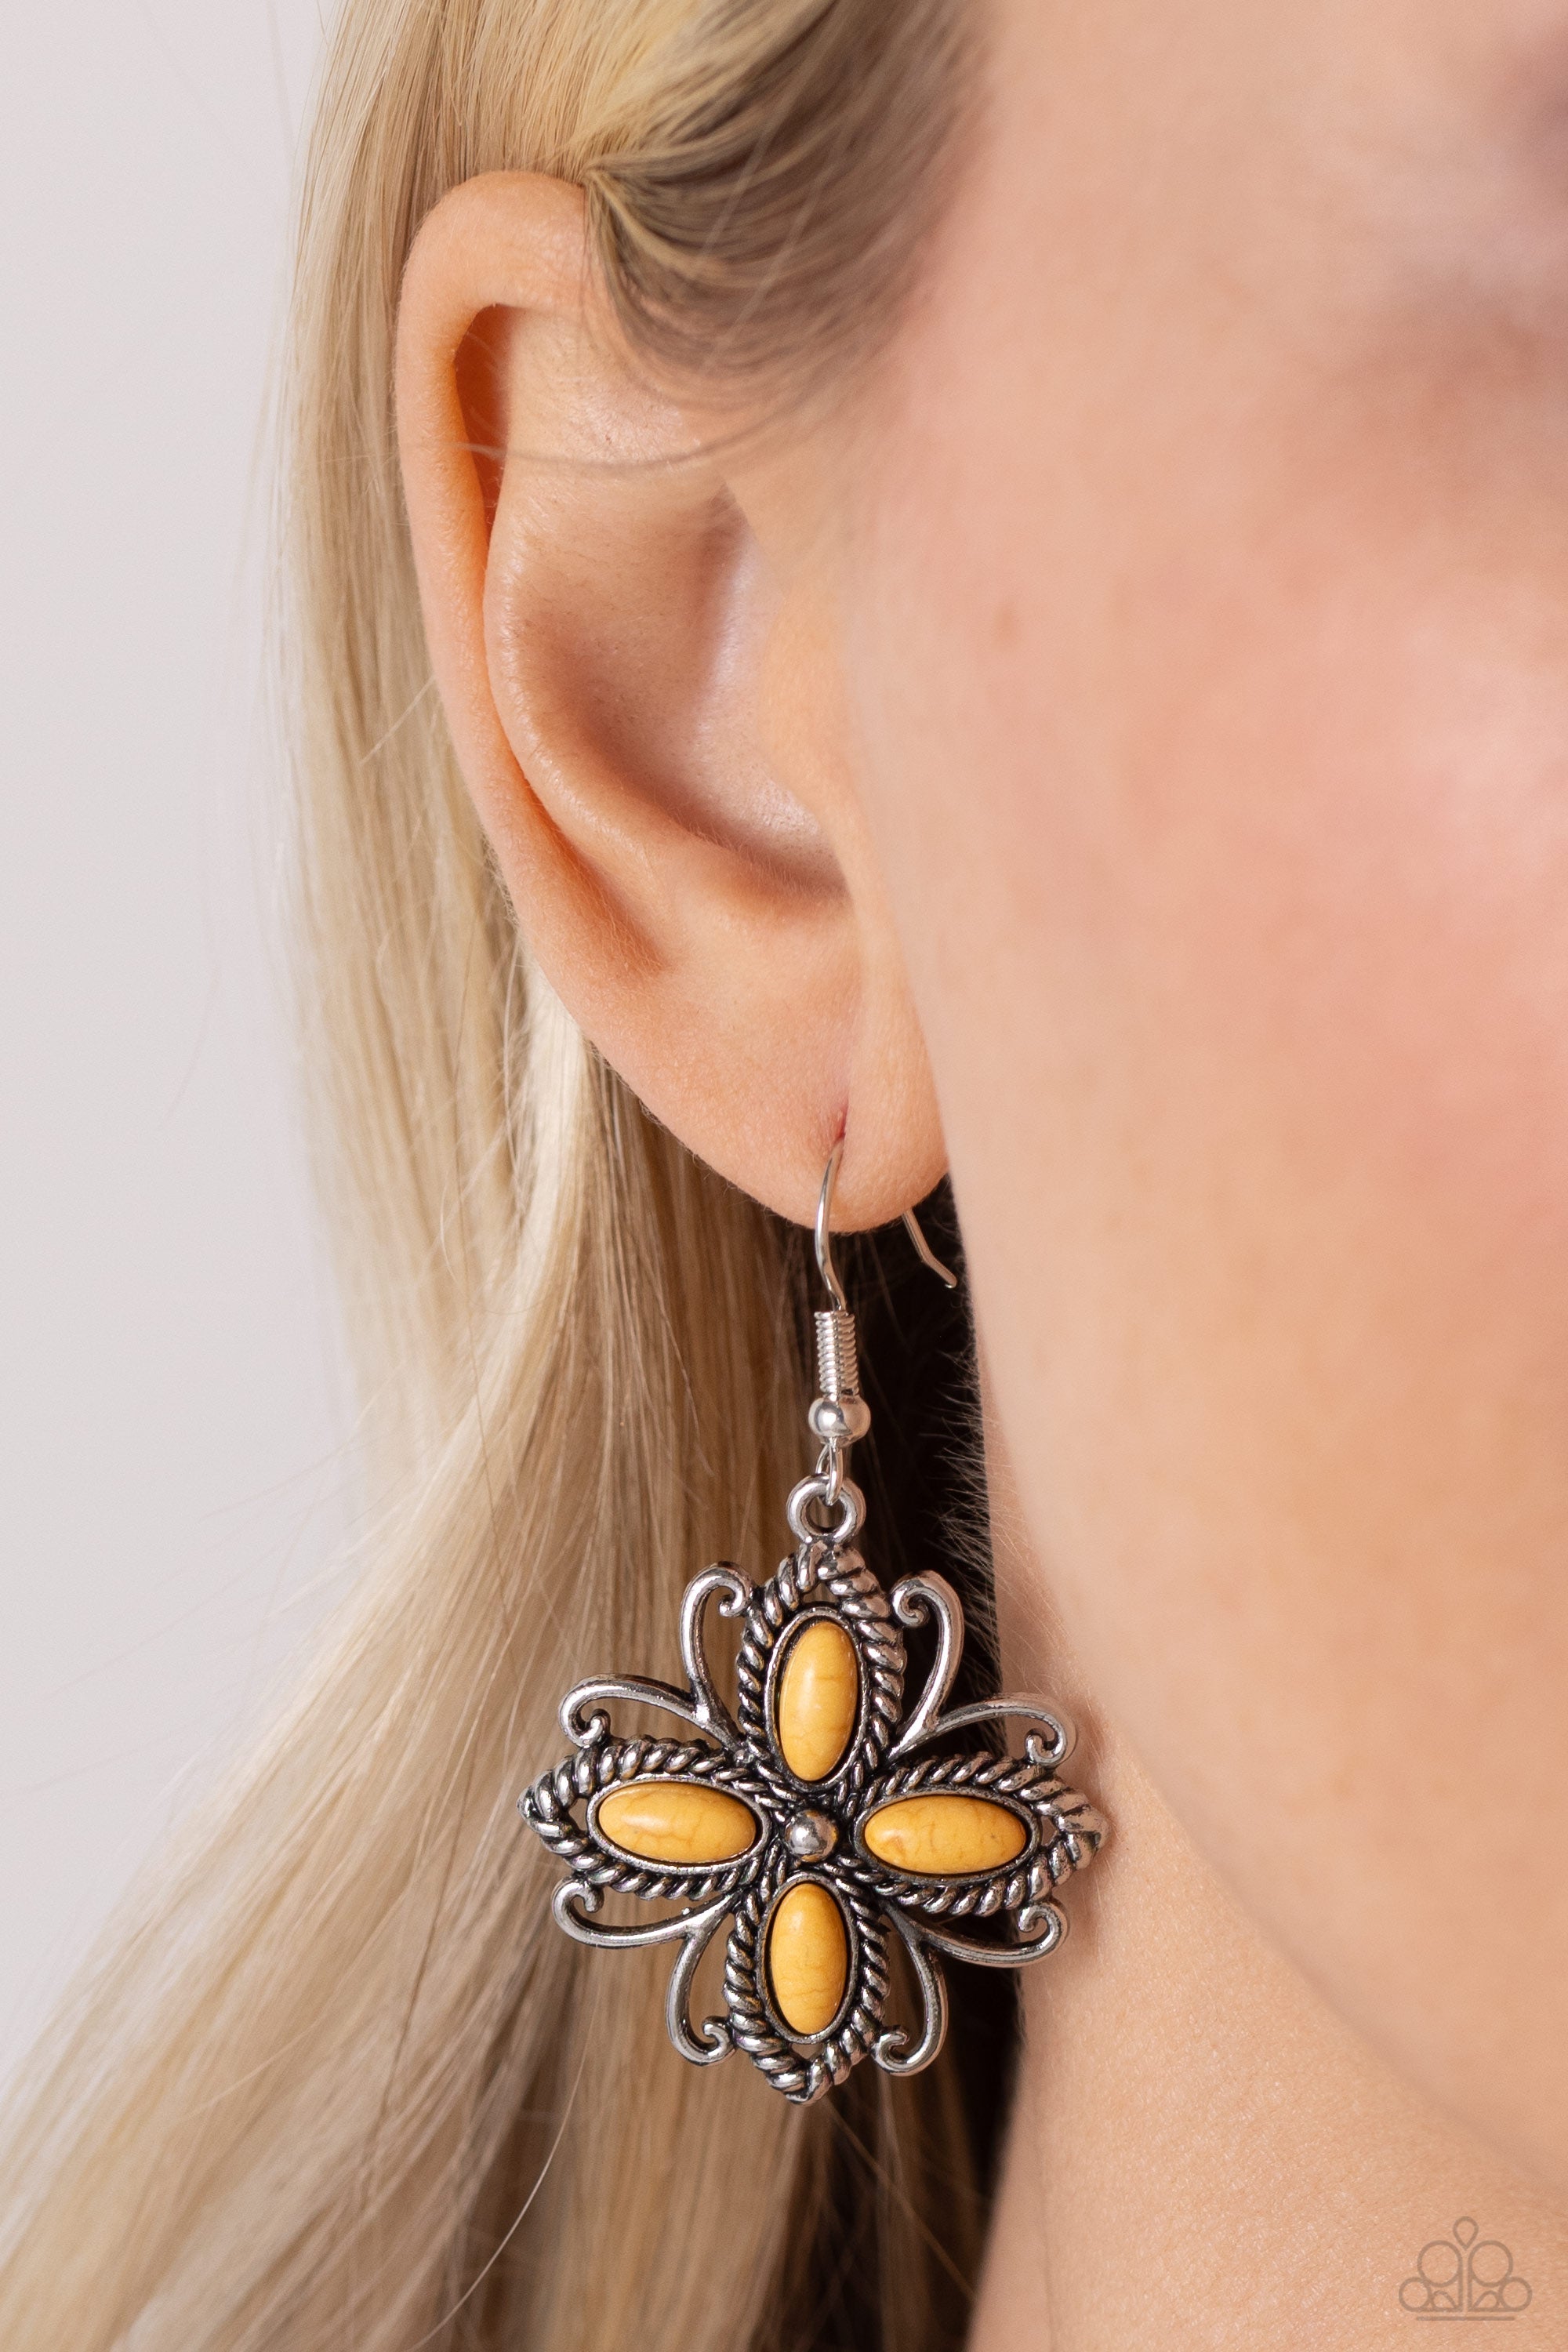 Badlands Ballad Yellow Stone Earrings - Paparazzi Accessories- lightbox - CarasShop.com - $5 Jewelry by Cara Jewels